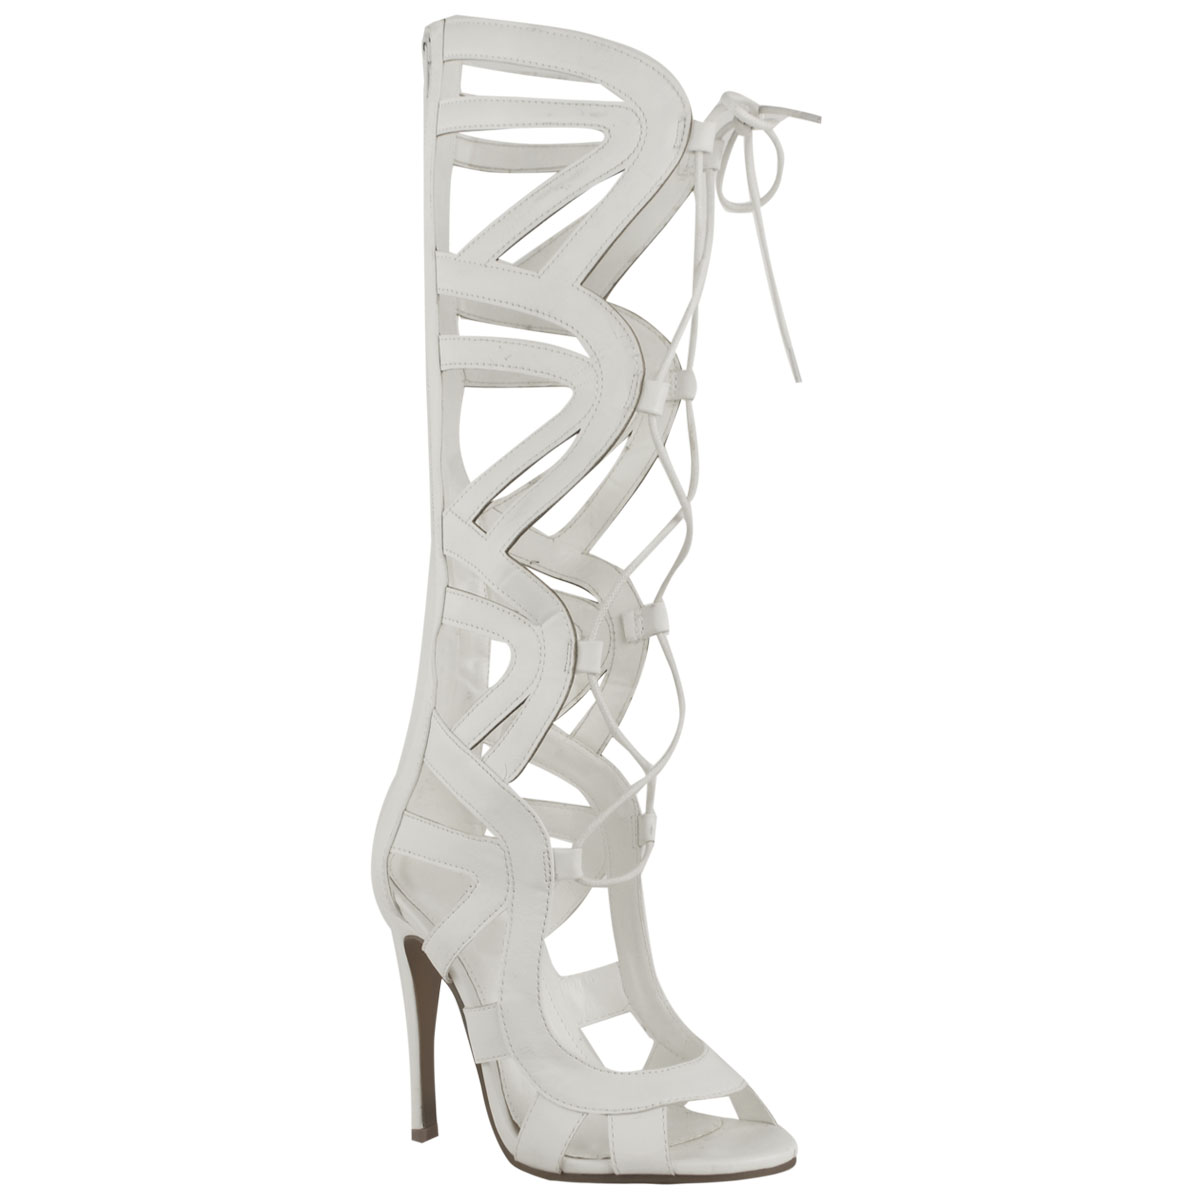 ... -WOMENS-KNEE-HIGH-LACE-UP-CUT-OUT-SHOES-HEELS-GLADIATOR-SANDALS-SIZE